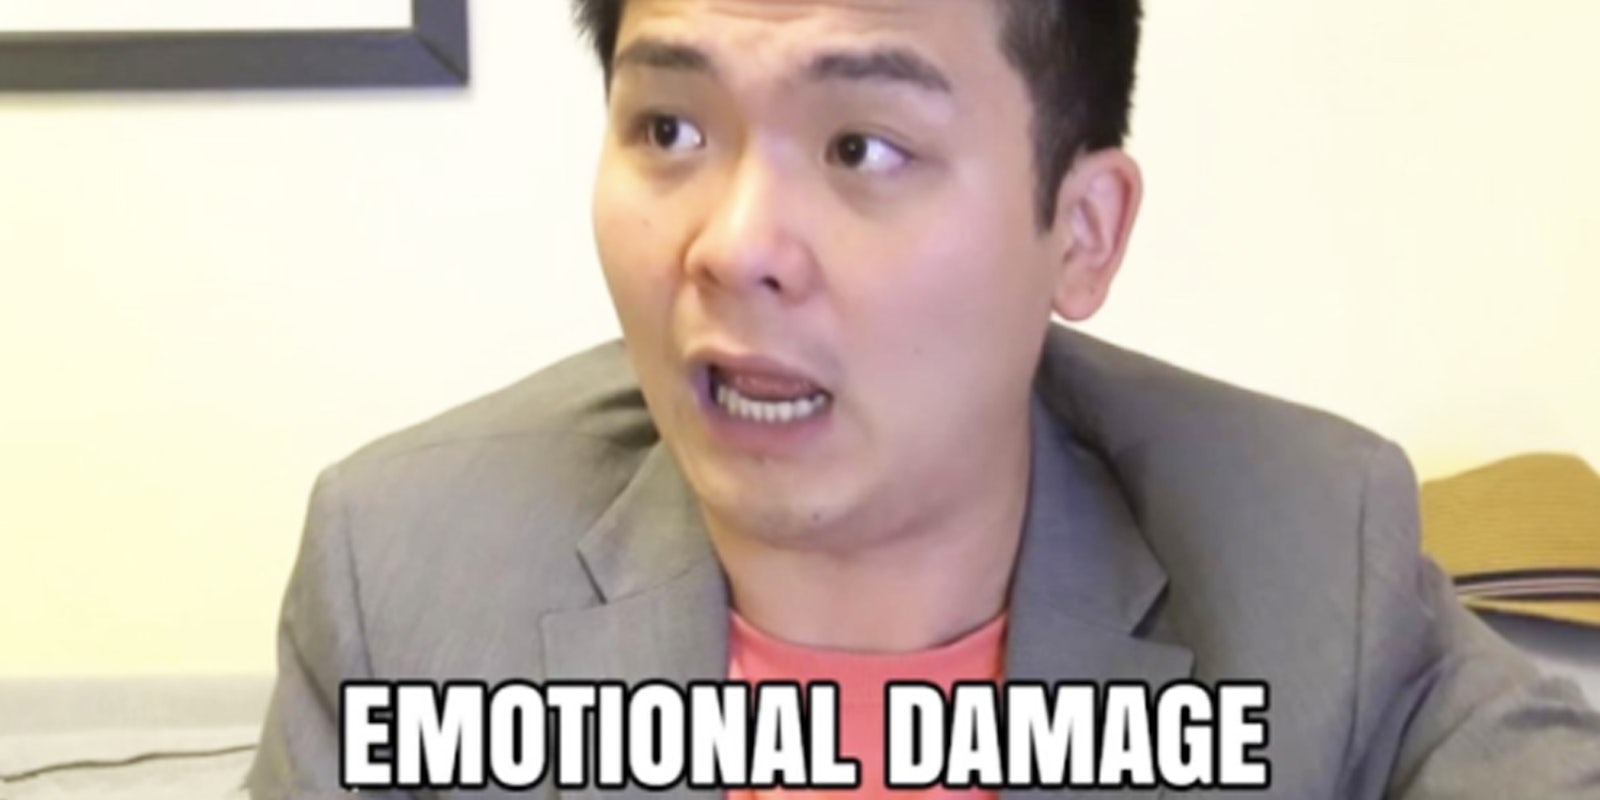 Emotional Damage Meme: What Is It, And How Is It Used?